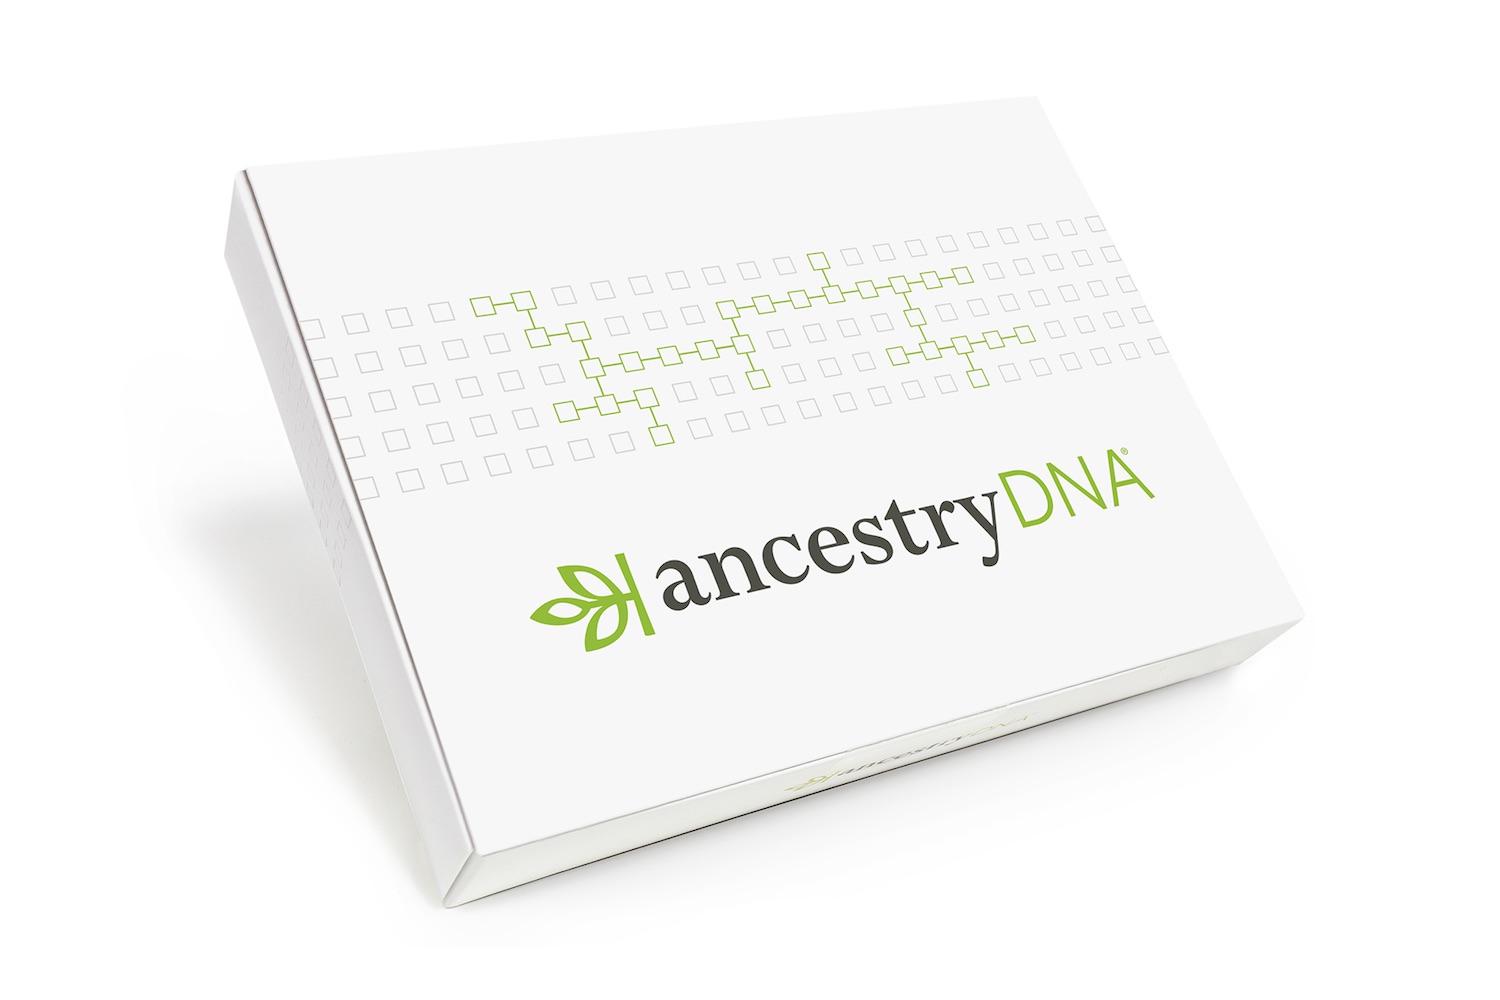 Prime Day deal: 50% off 23andMe DNA Test and Ancestry Kit, London  Evening Standard